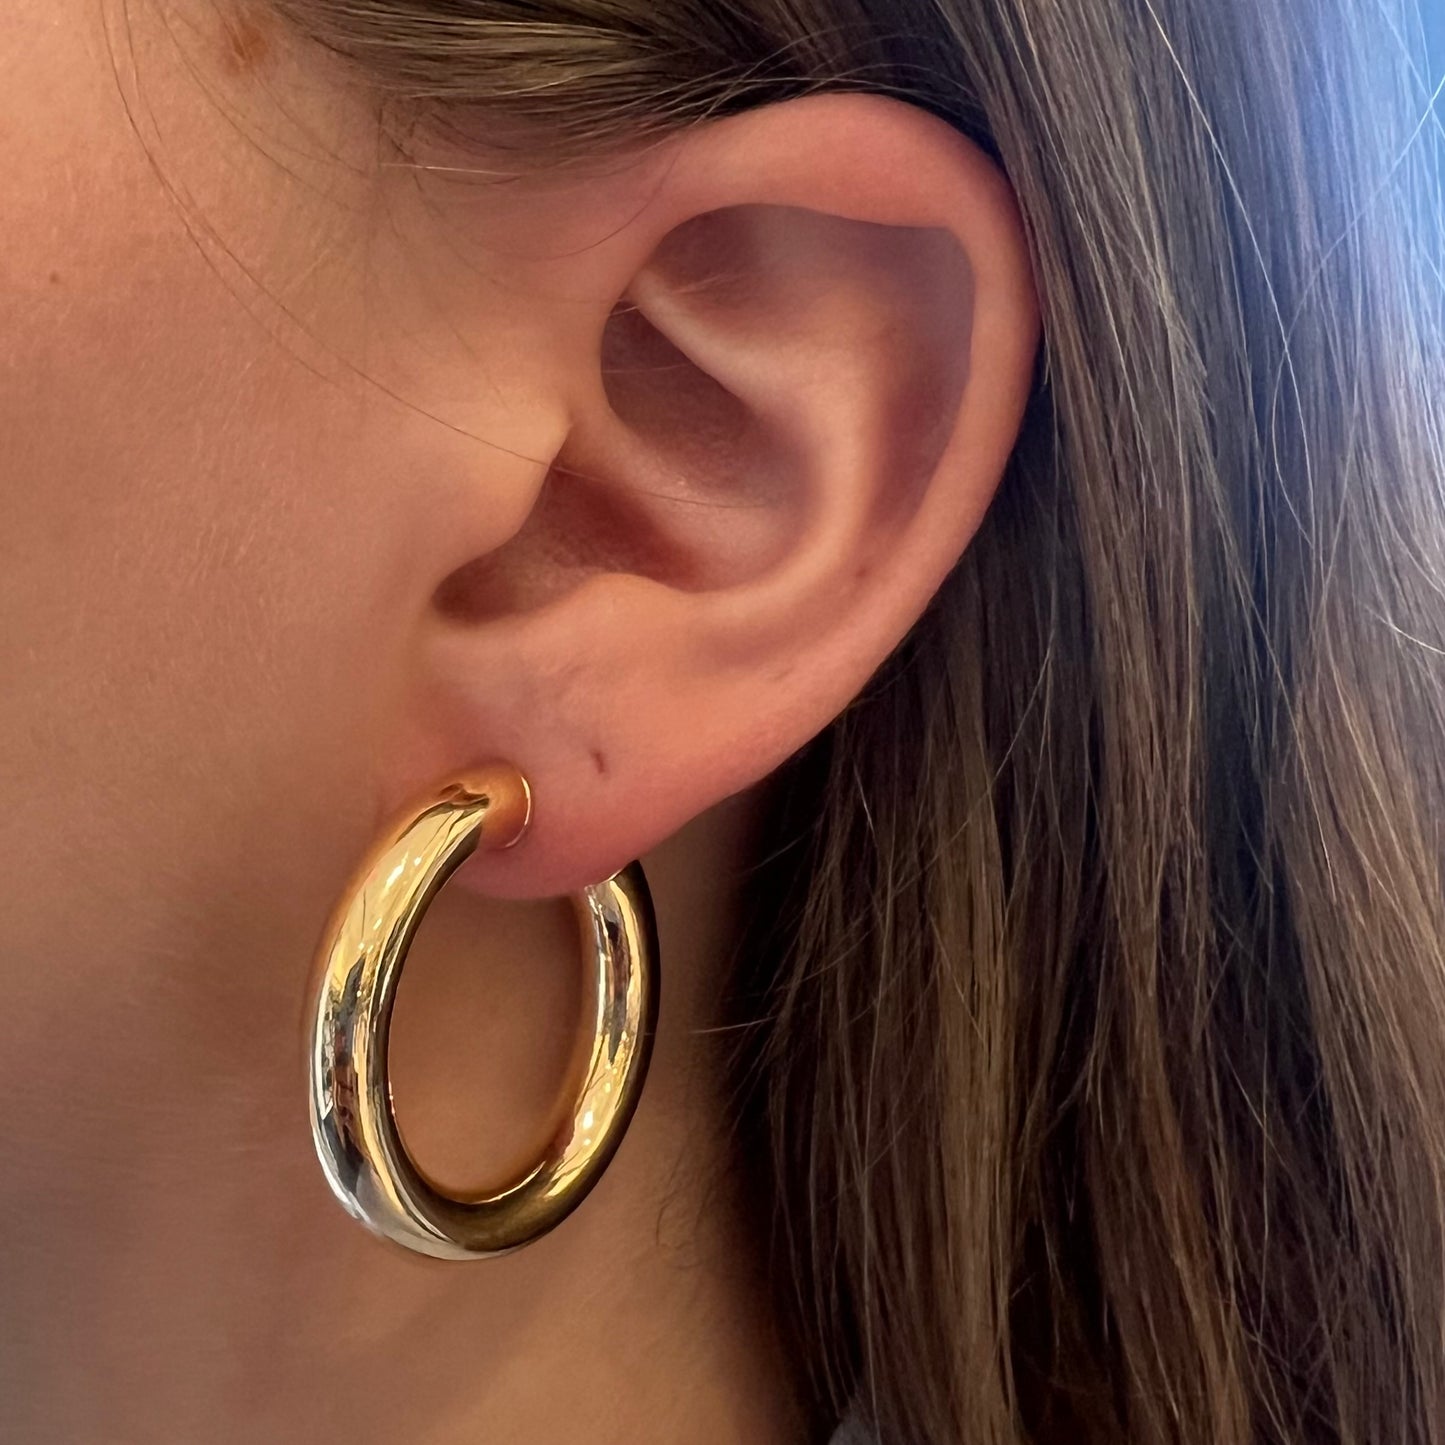 Gold Hoops on Post